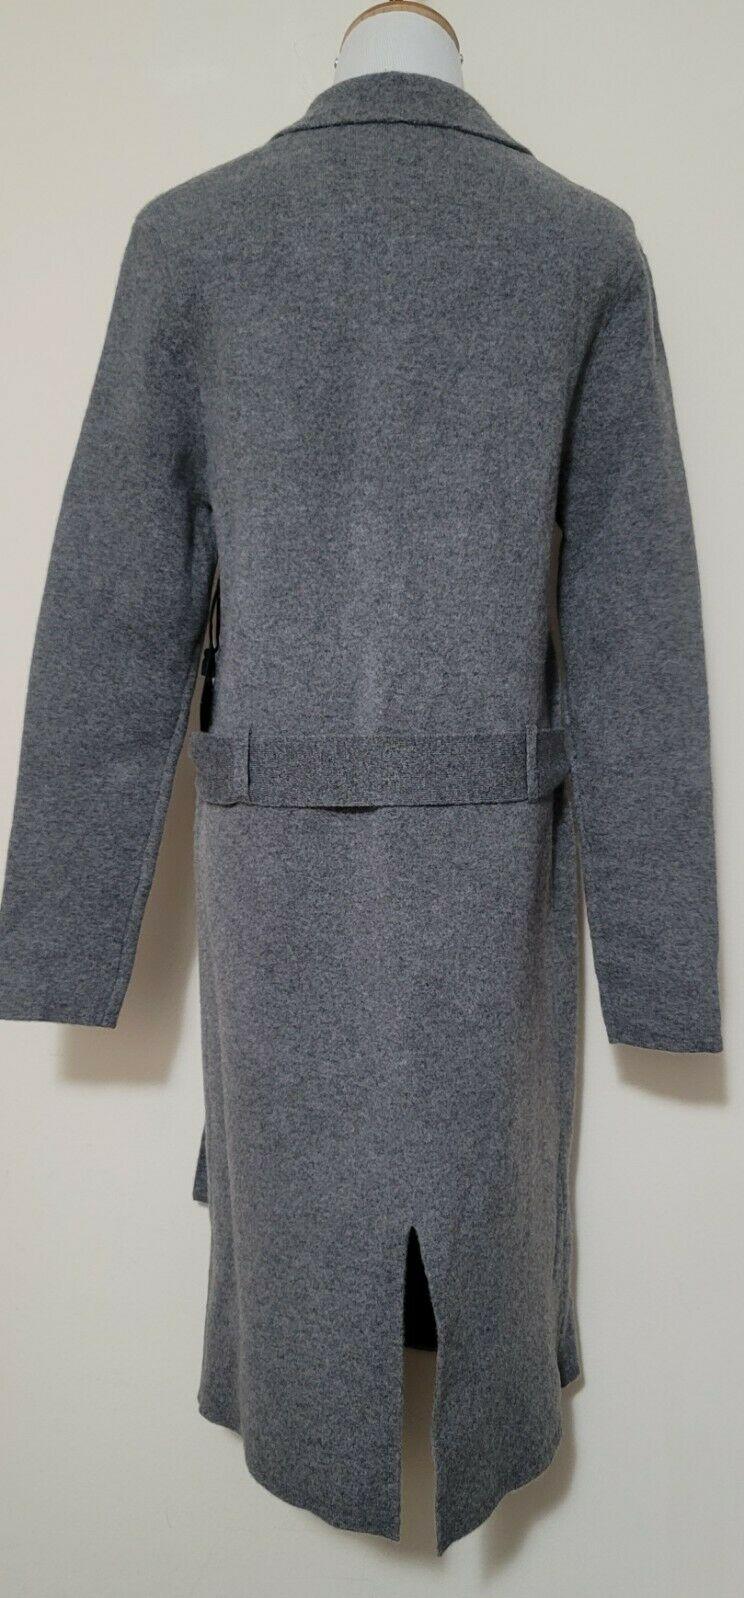 SWTR Touch of Cashmere Women's Merino Wool Gray Open Front Belted Coat Size S-M - SVNYFancy